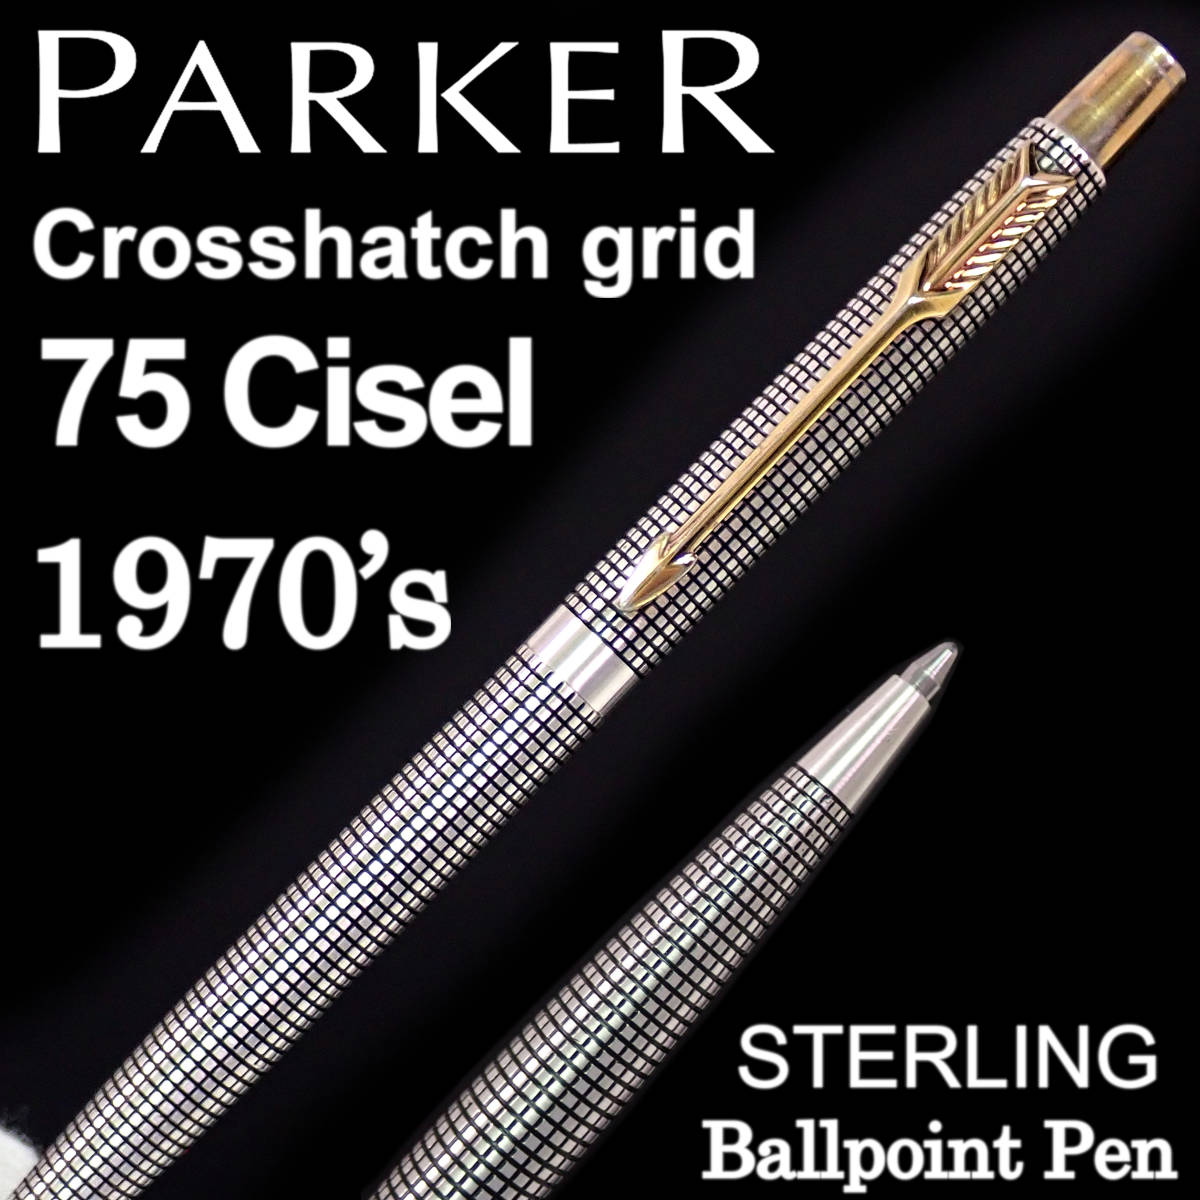 1970's パーカー 75 シズレ スターリング ボールペン 1970年代 PARKER75 Cisel STERLING